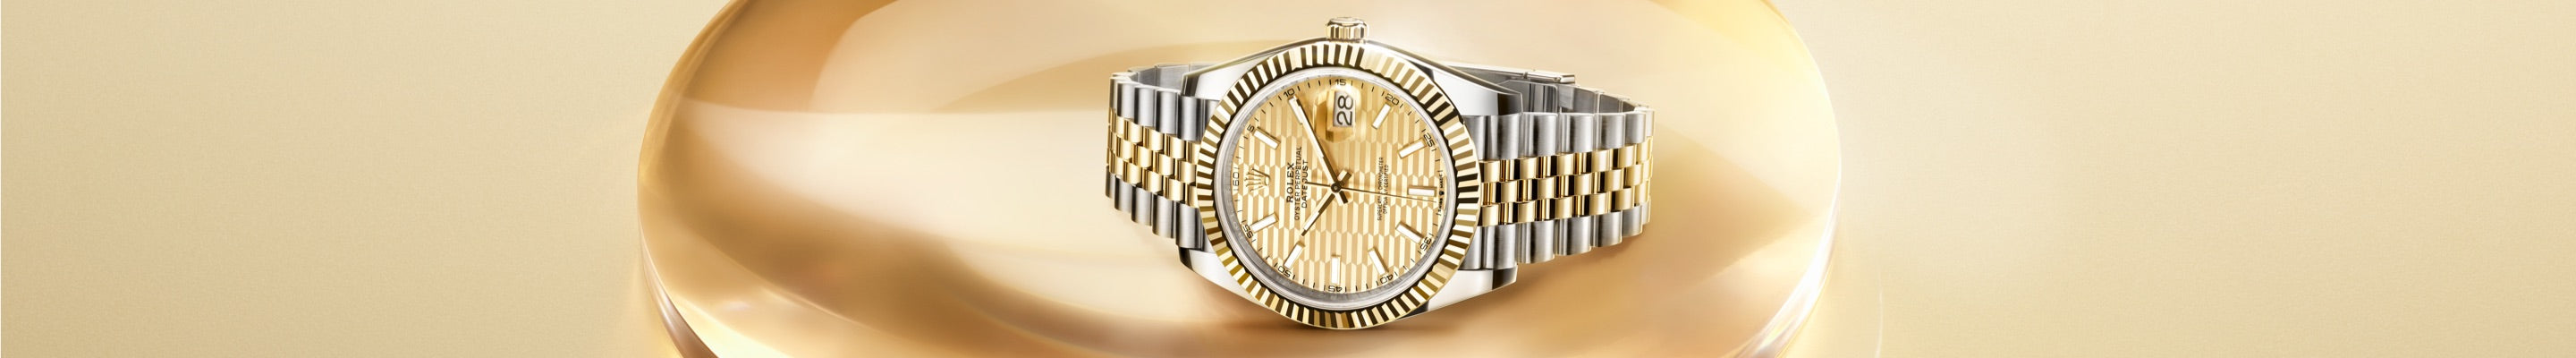 Rolex Datejust on Gold Background at Fink's Jewelers